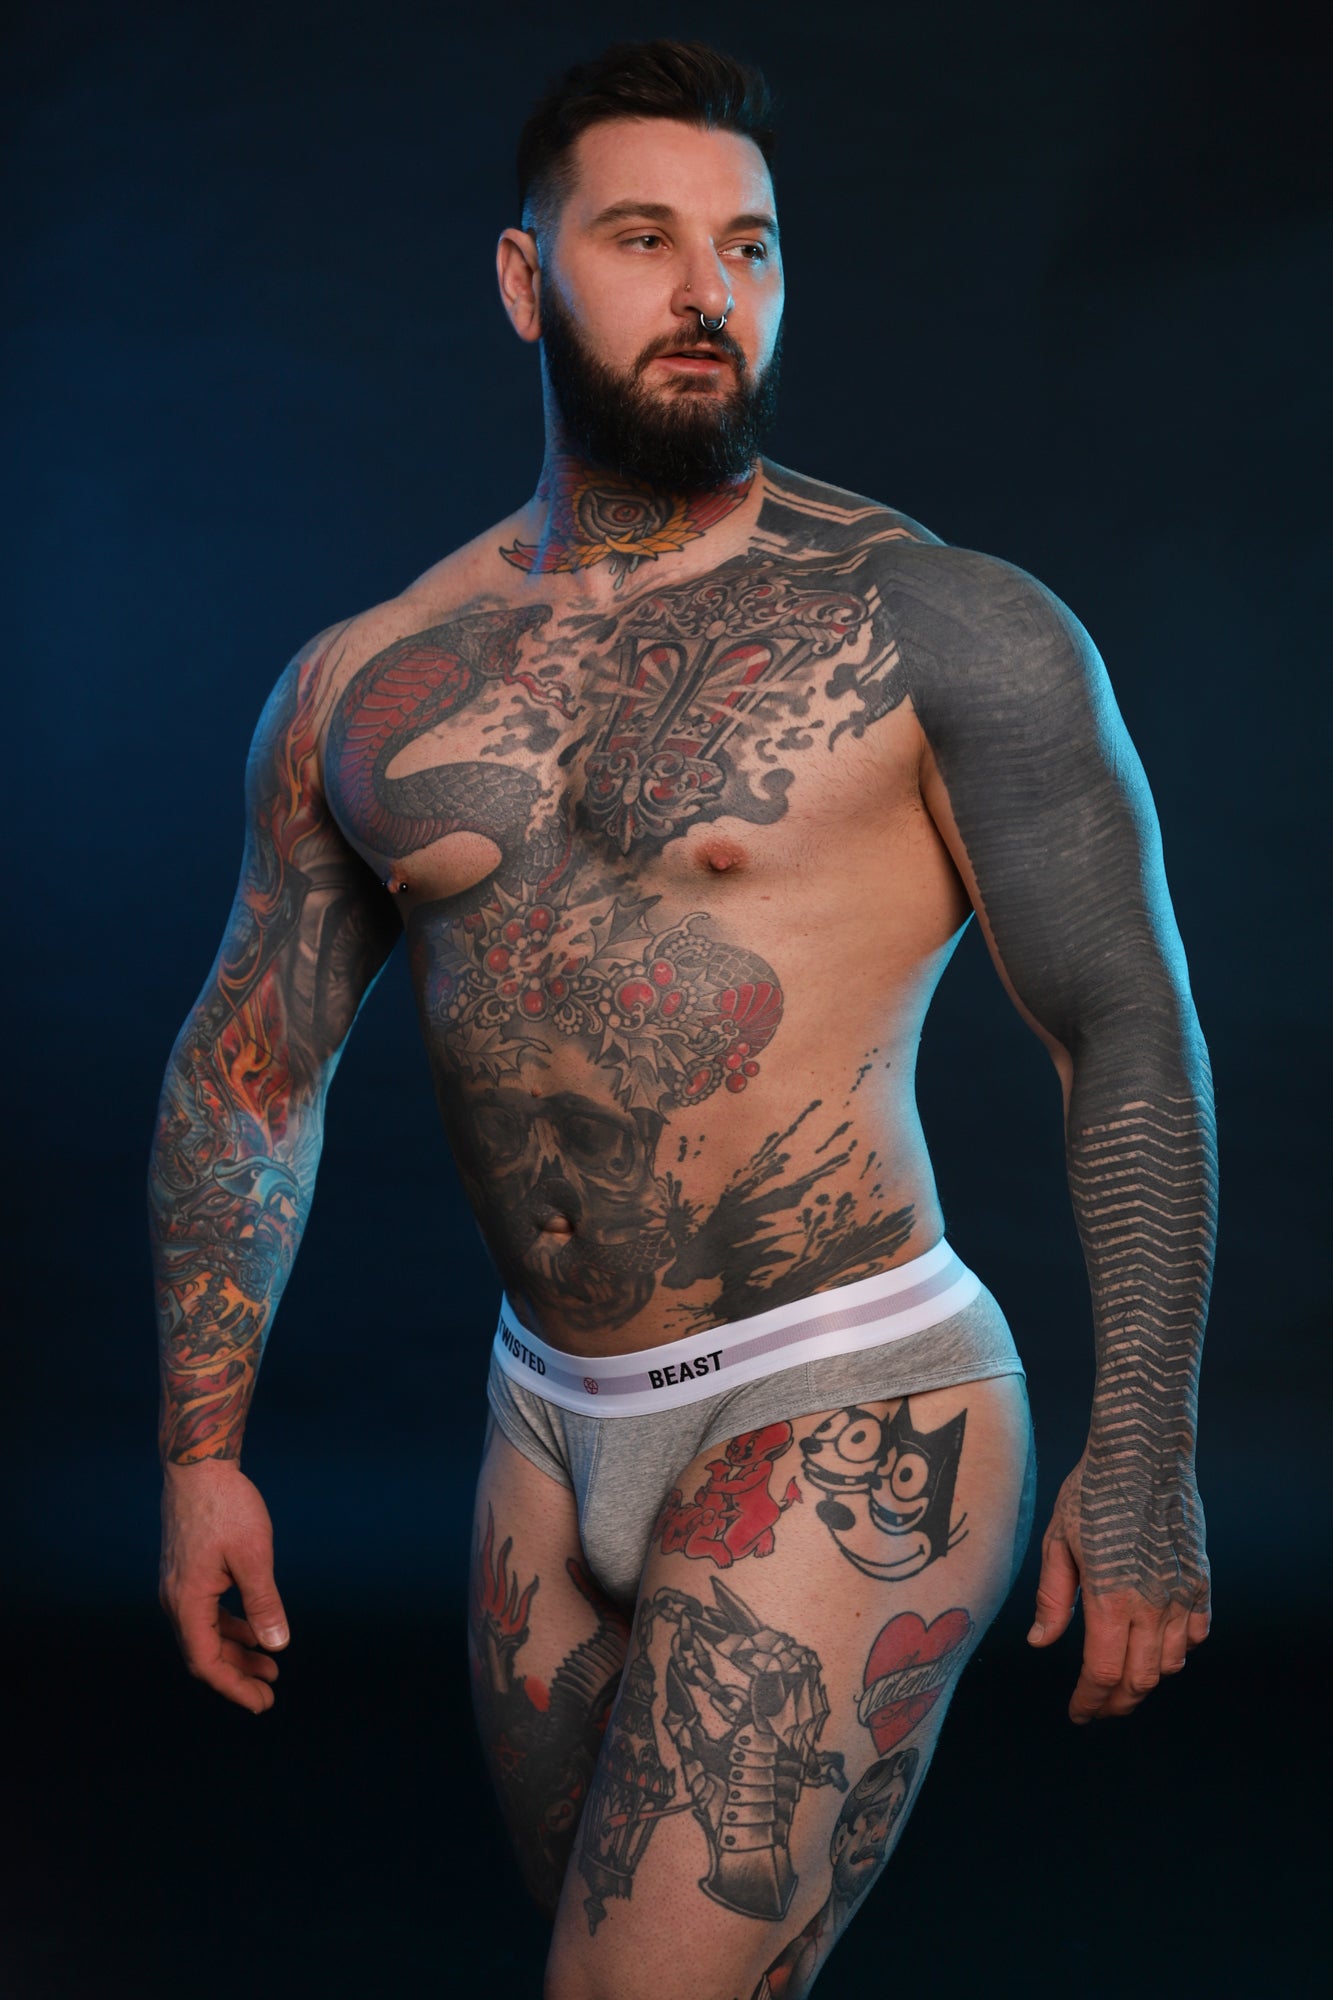 A model for Twisted Beast wearing Insignia Brief's in Grey.